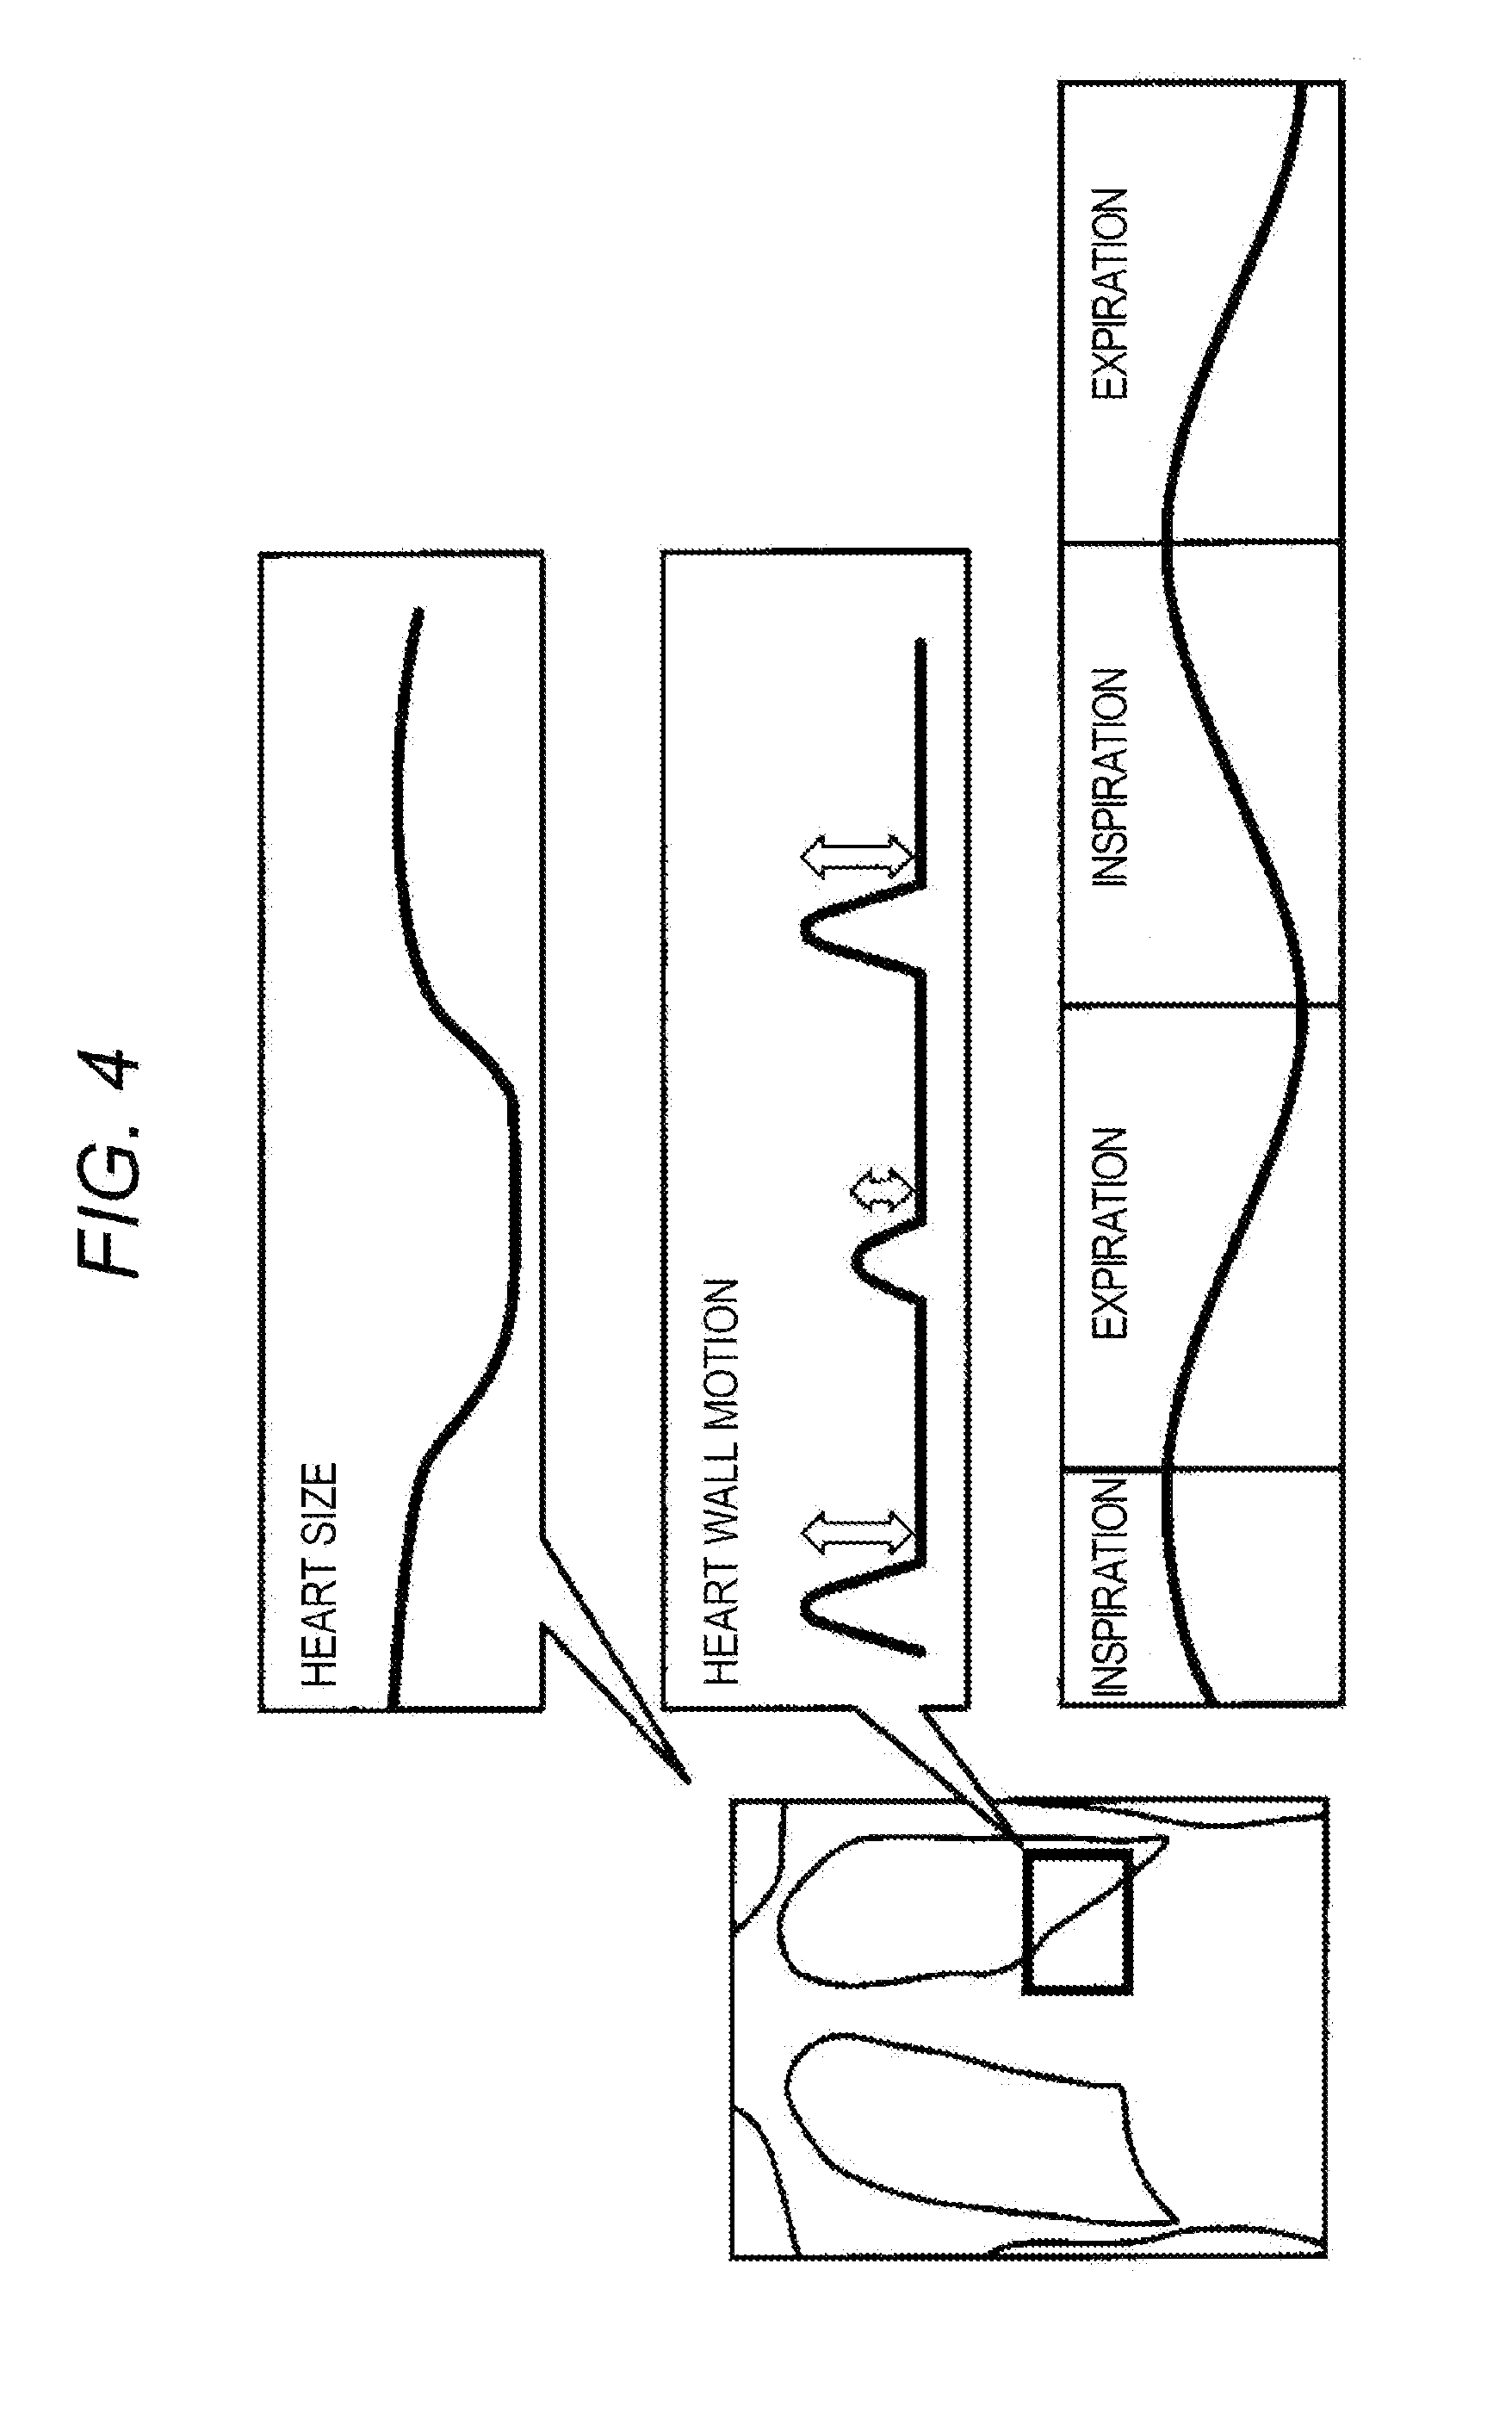 Image analysis device, imaging system, and non-transitory recording medium